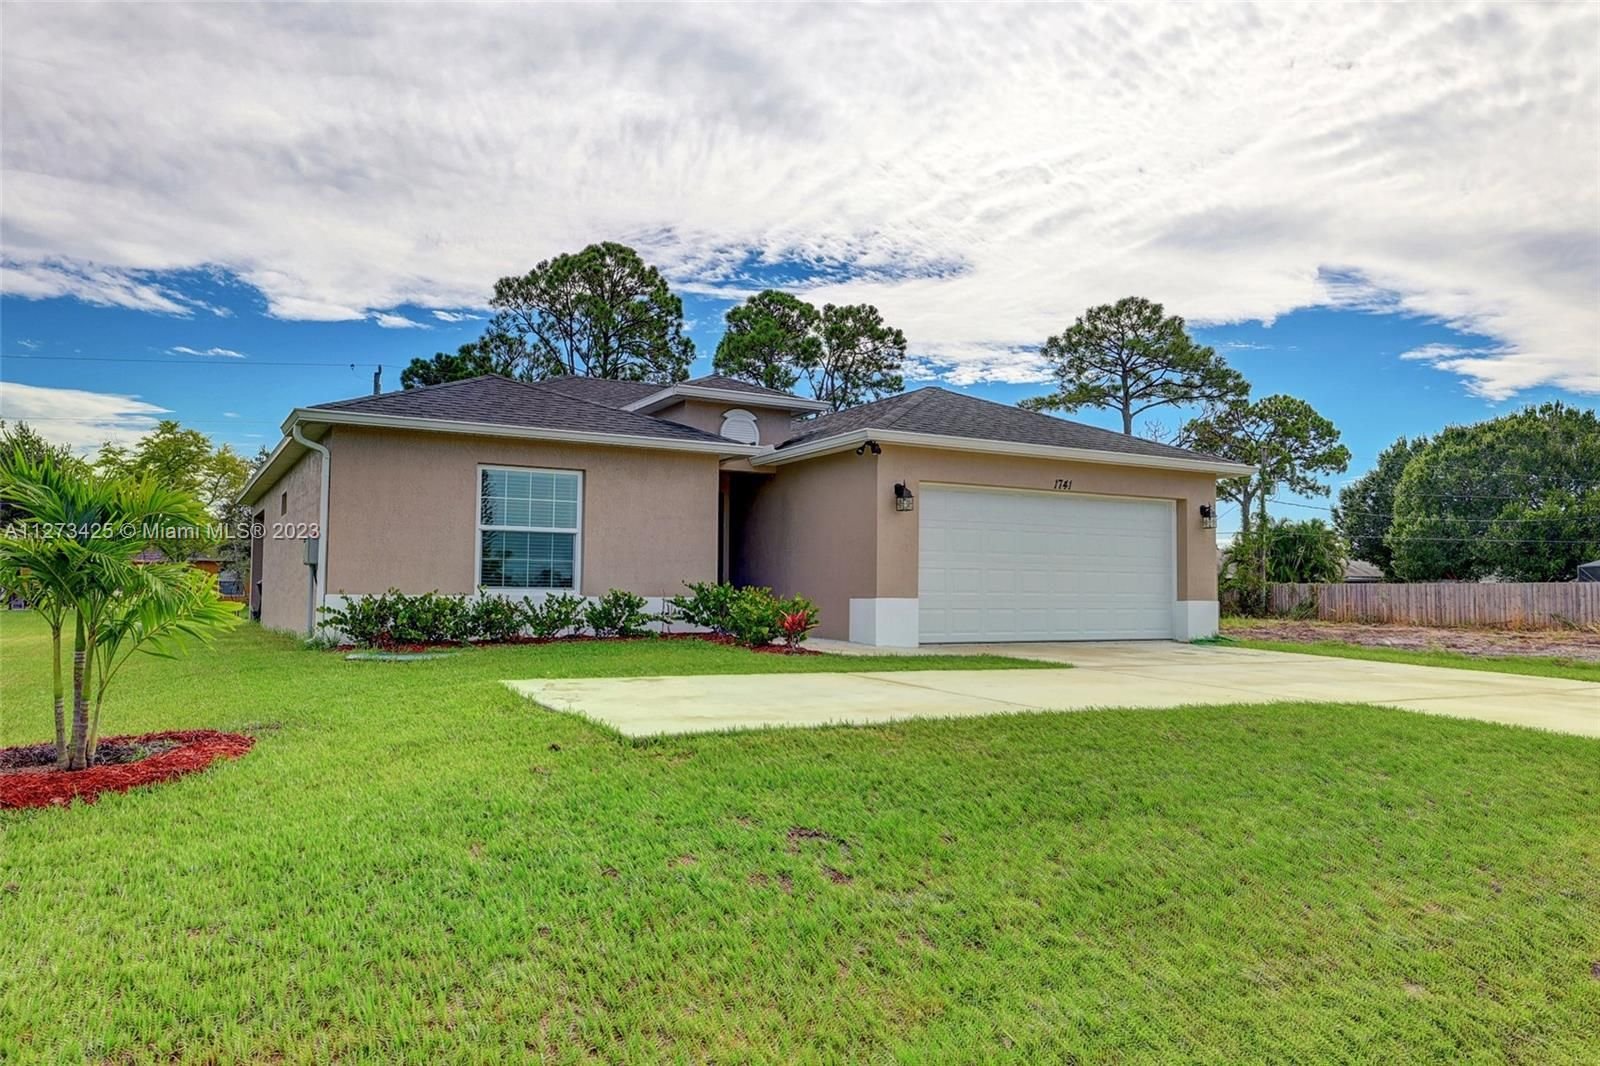 Real estate property located at 1741 Sandia Dr, St Lucie County, Port St. Lucie, FL